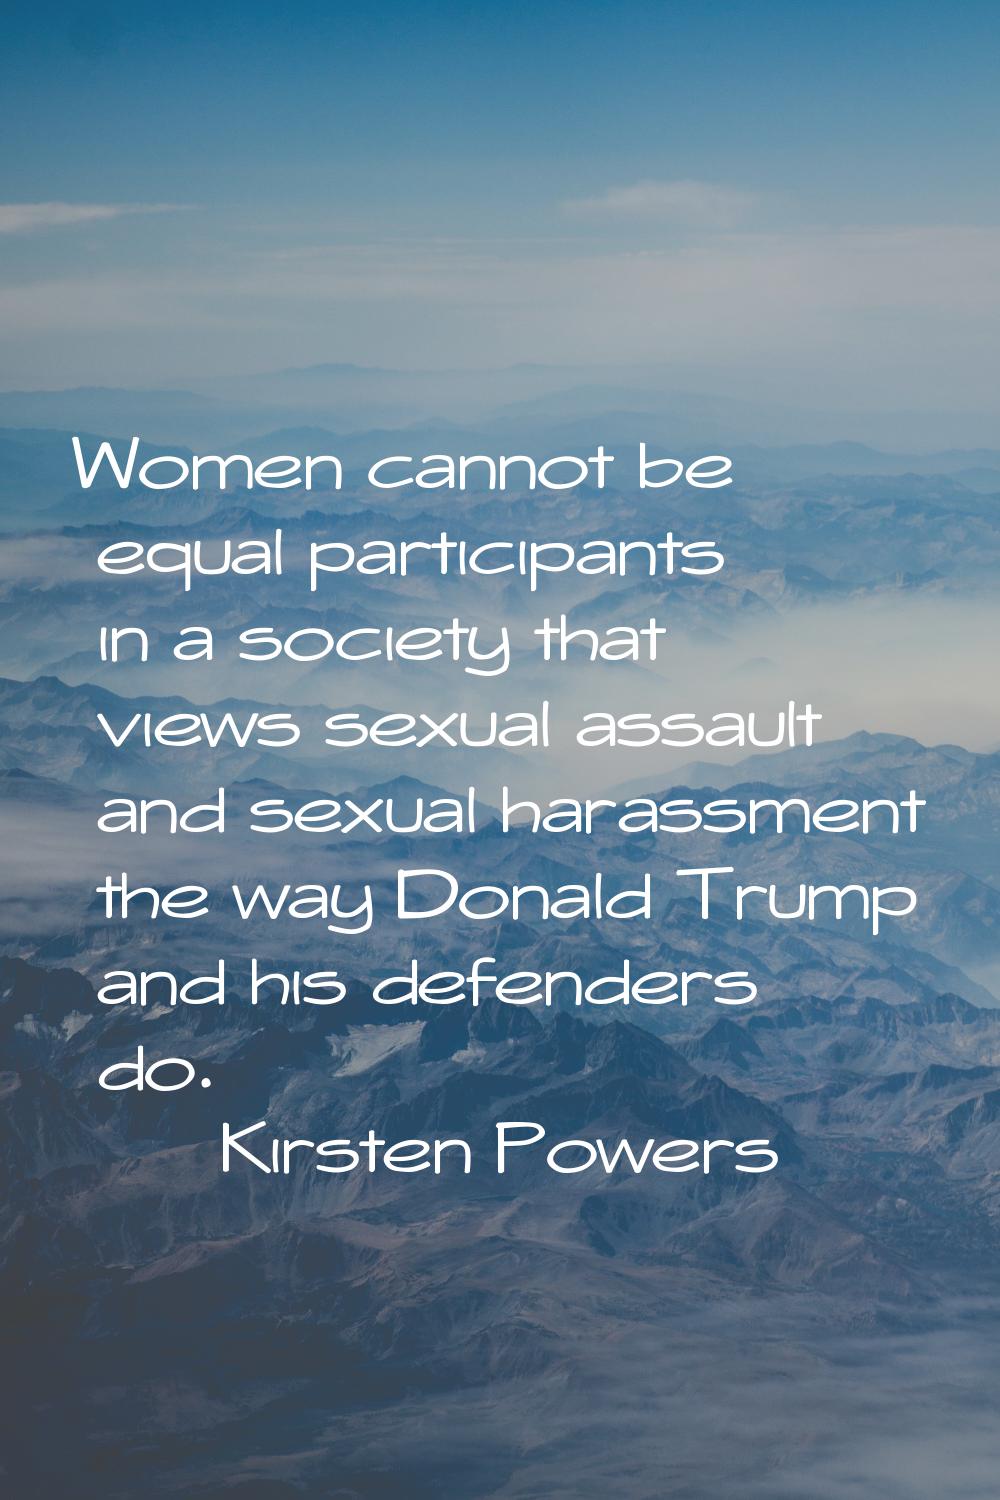 Women cannot be equal participants in a society that views sexual assault and sexual harassment the